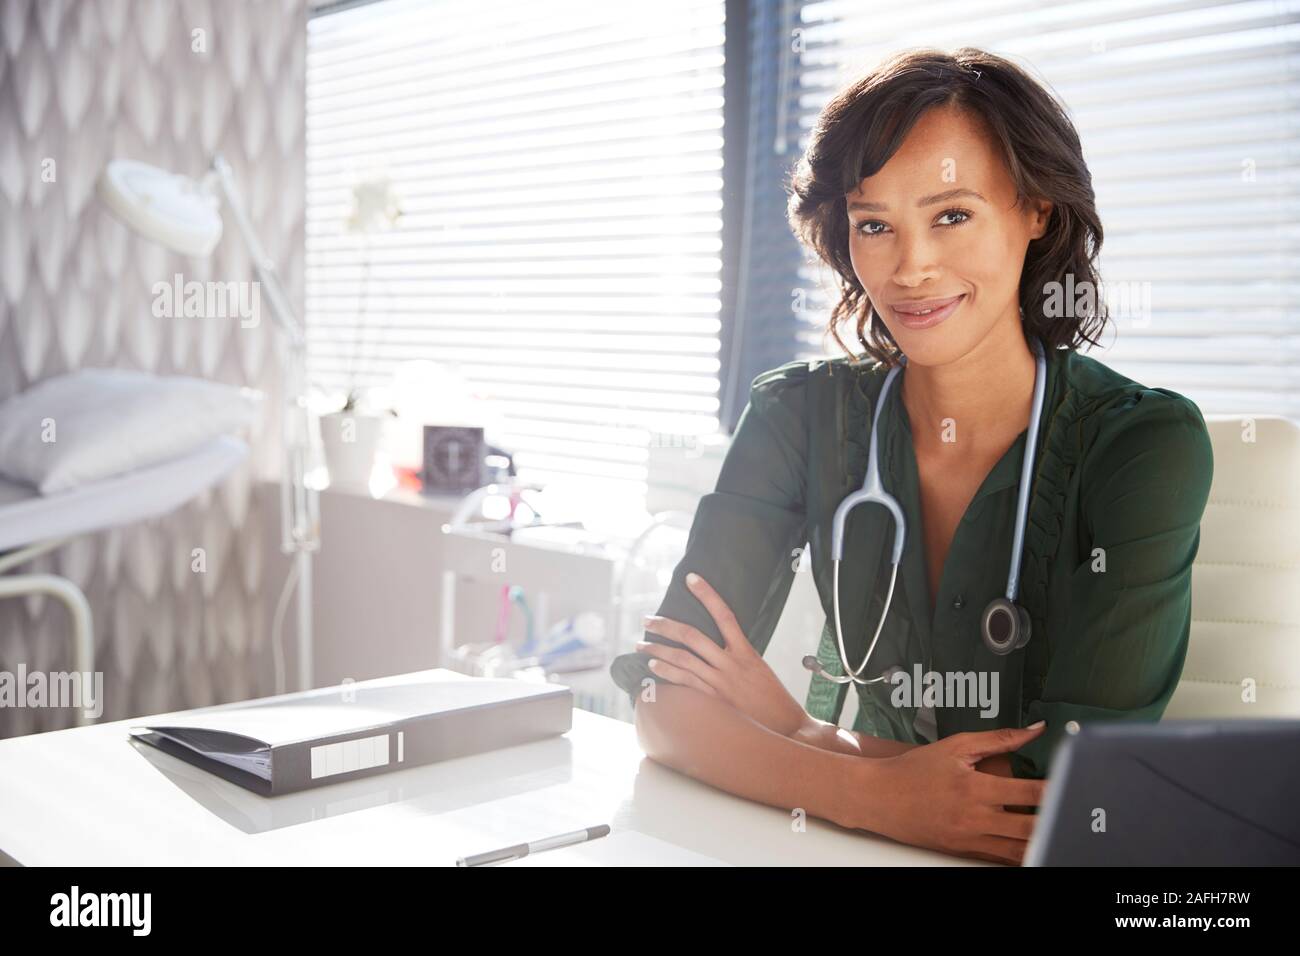 Portrait Of Smiling Female Doctor With Stethoscope Sitting Behind Desk In Office Stock Photo